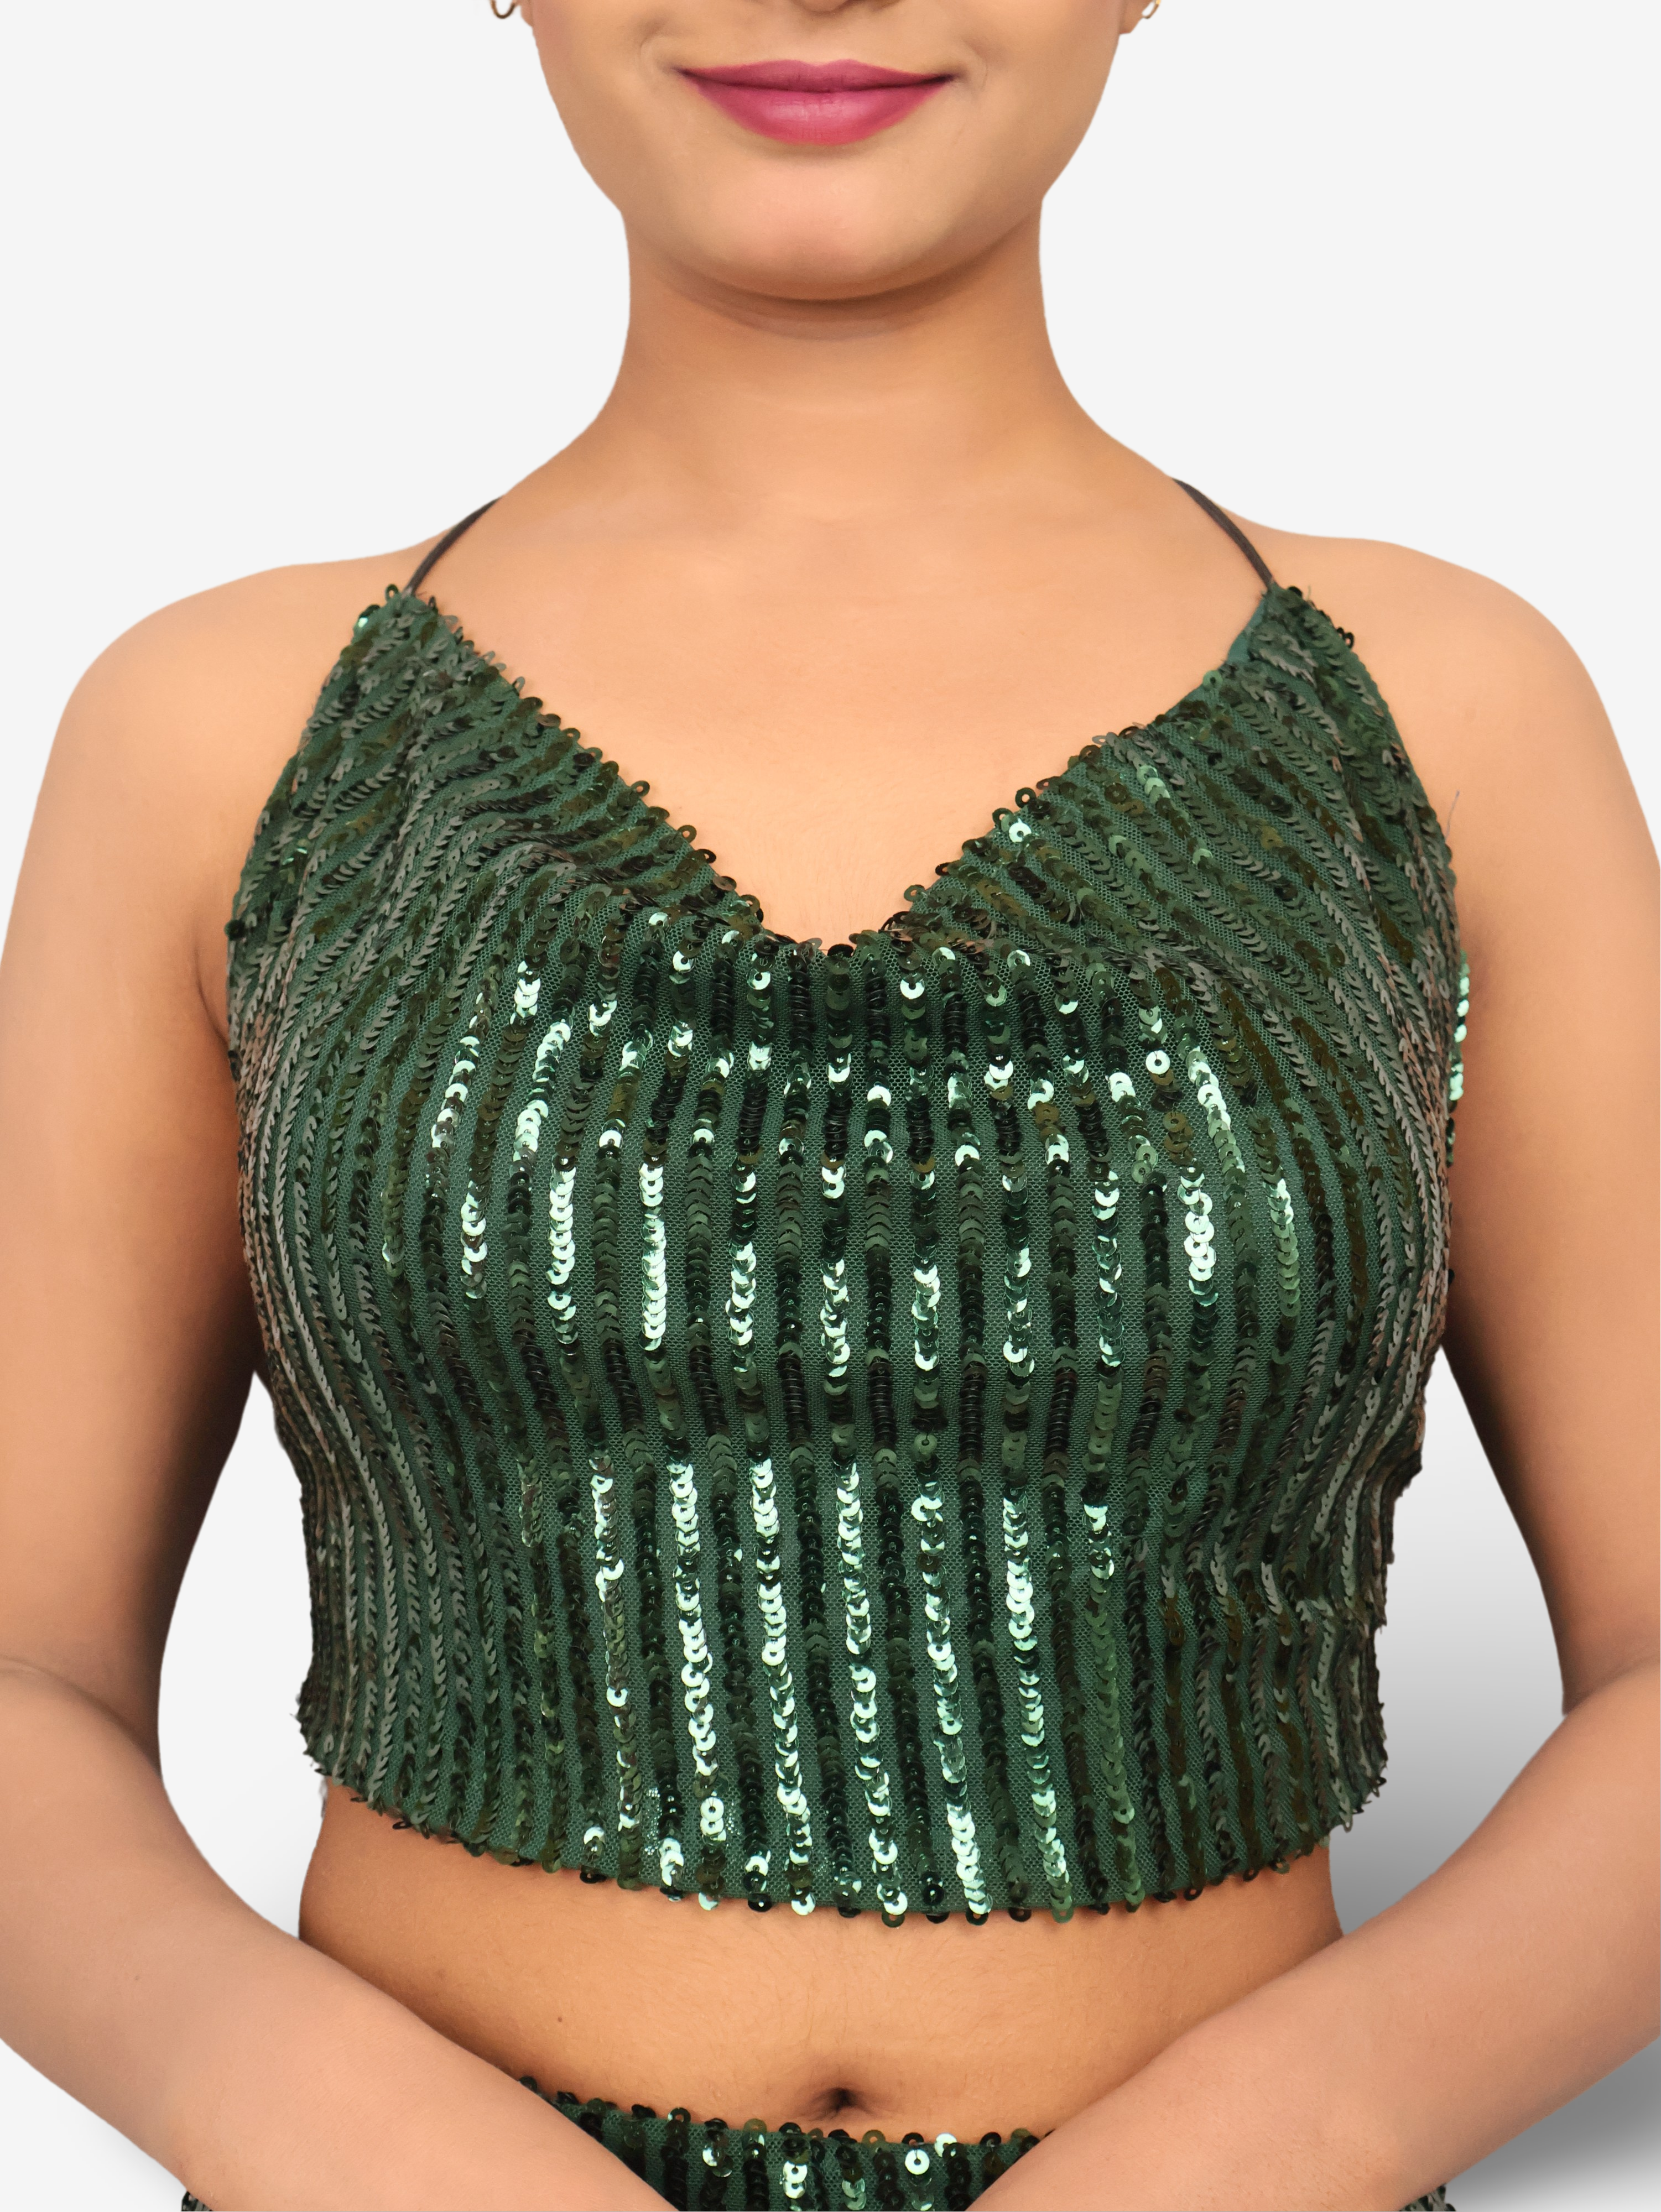 Sequins Spaghetti Neck Co-Ord Set by Shreekama Dark Green Dress for Party Festival Wedding Occasion in Noida